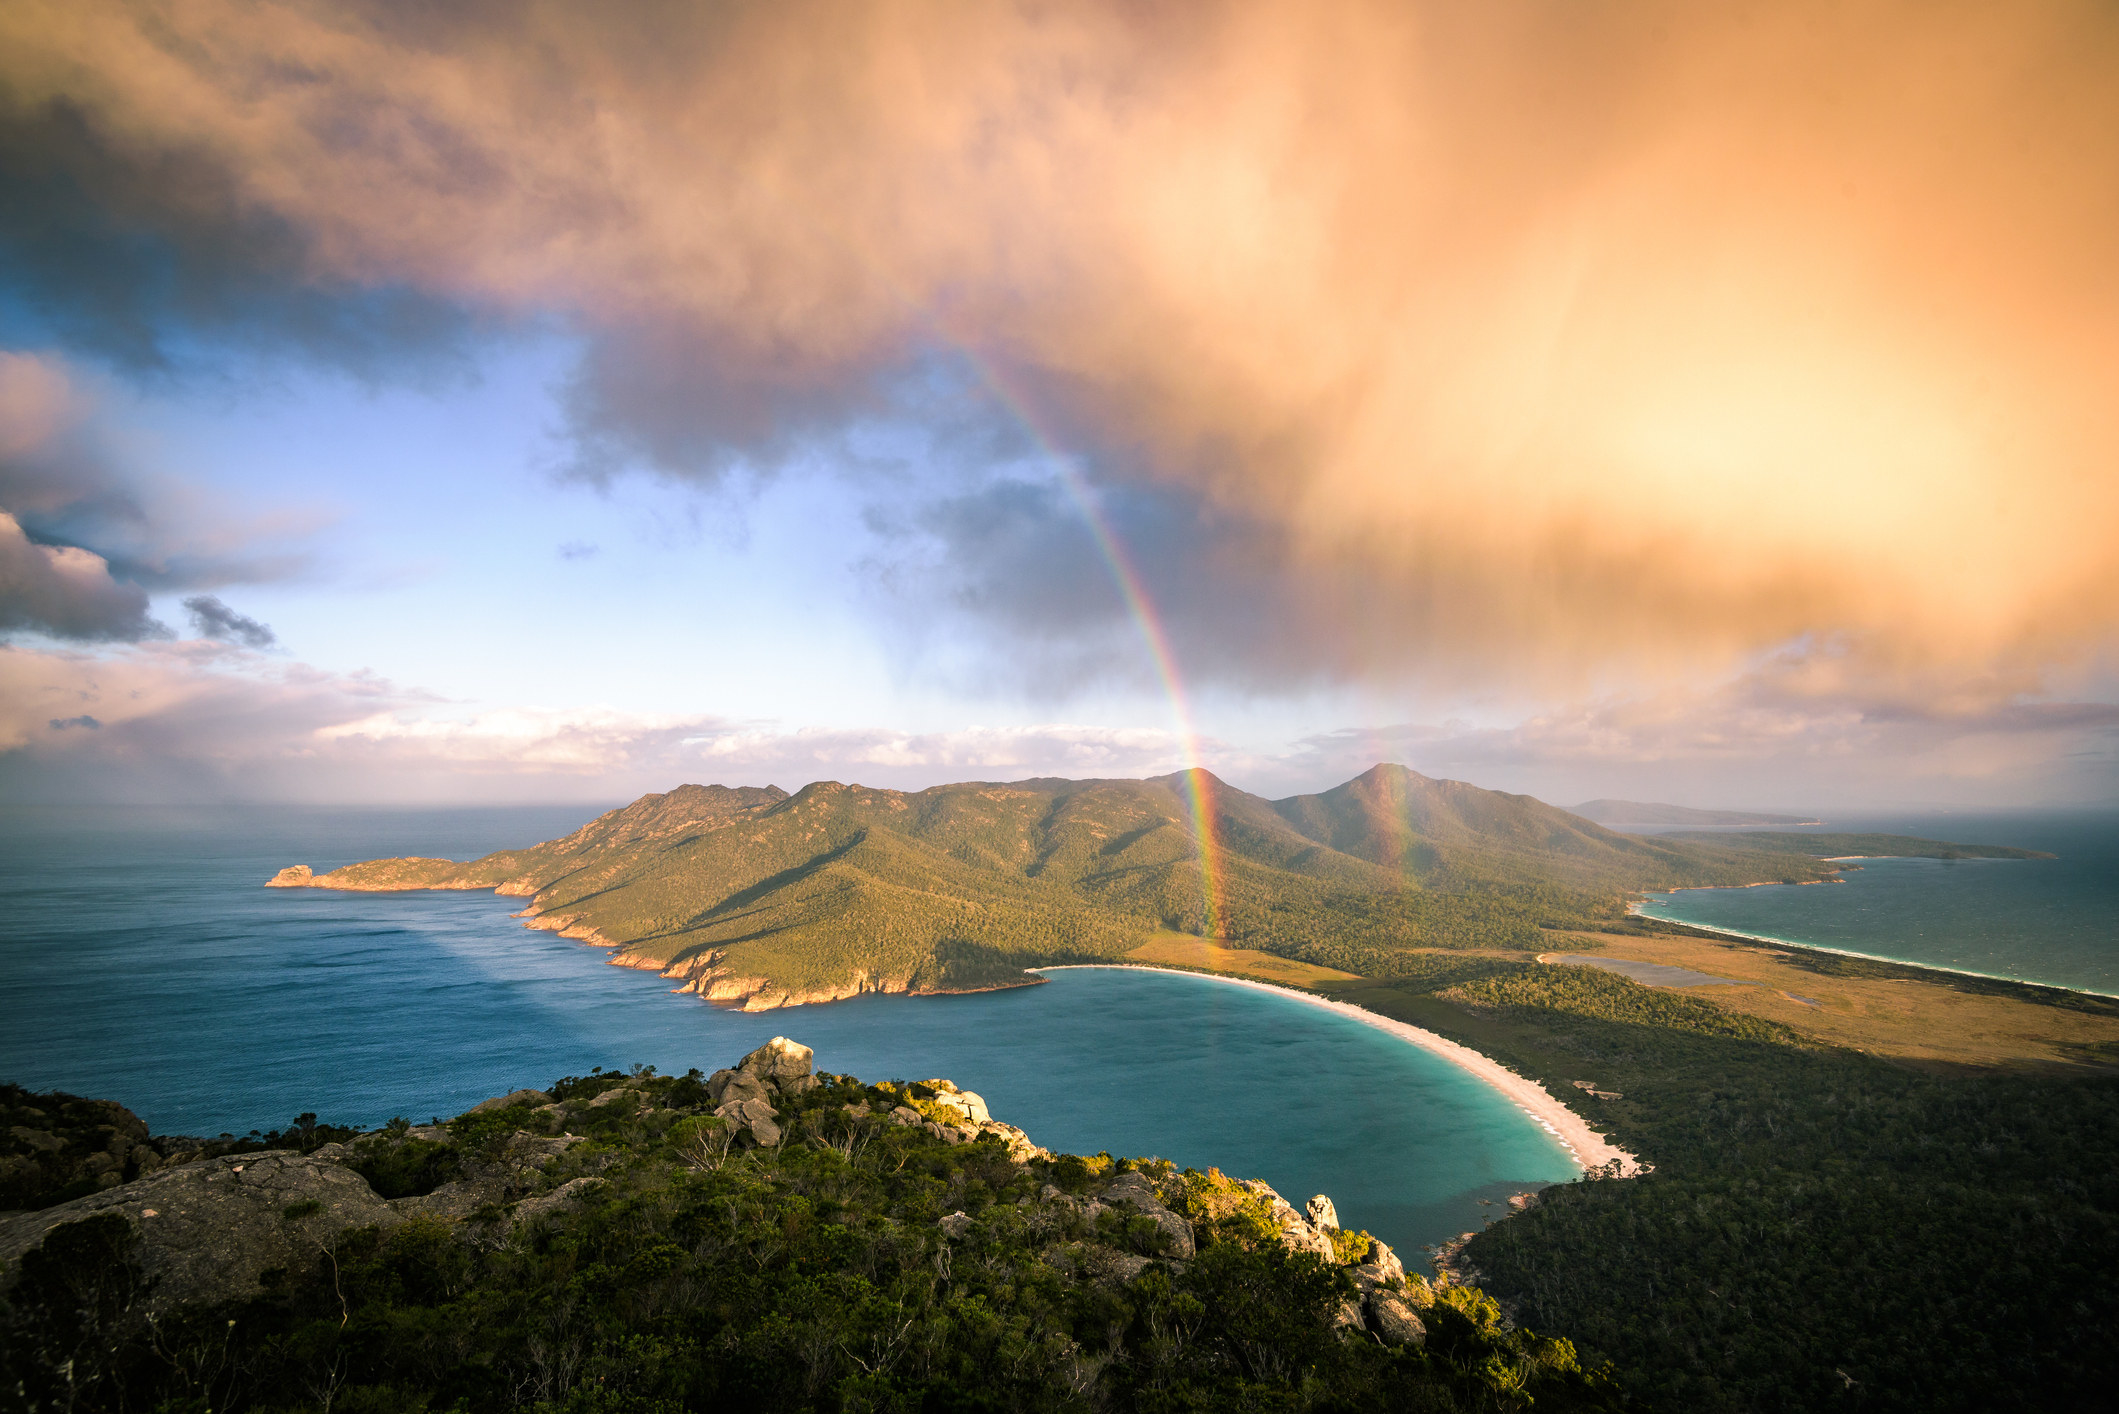 A storm cloud passing by mt Amos. View towards Wineglass Bay.